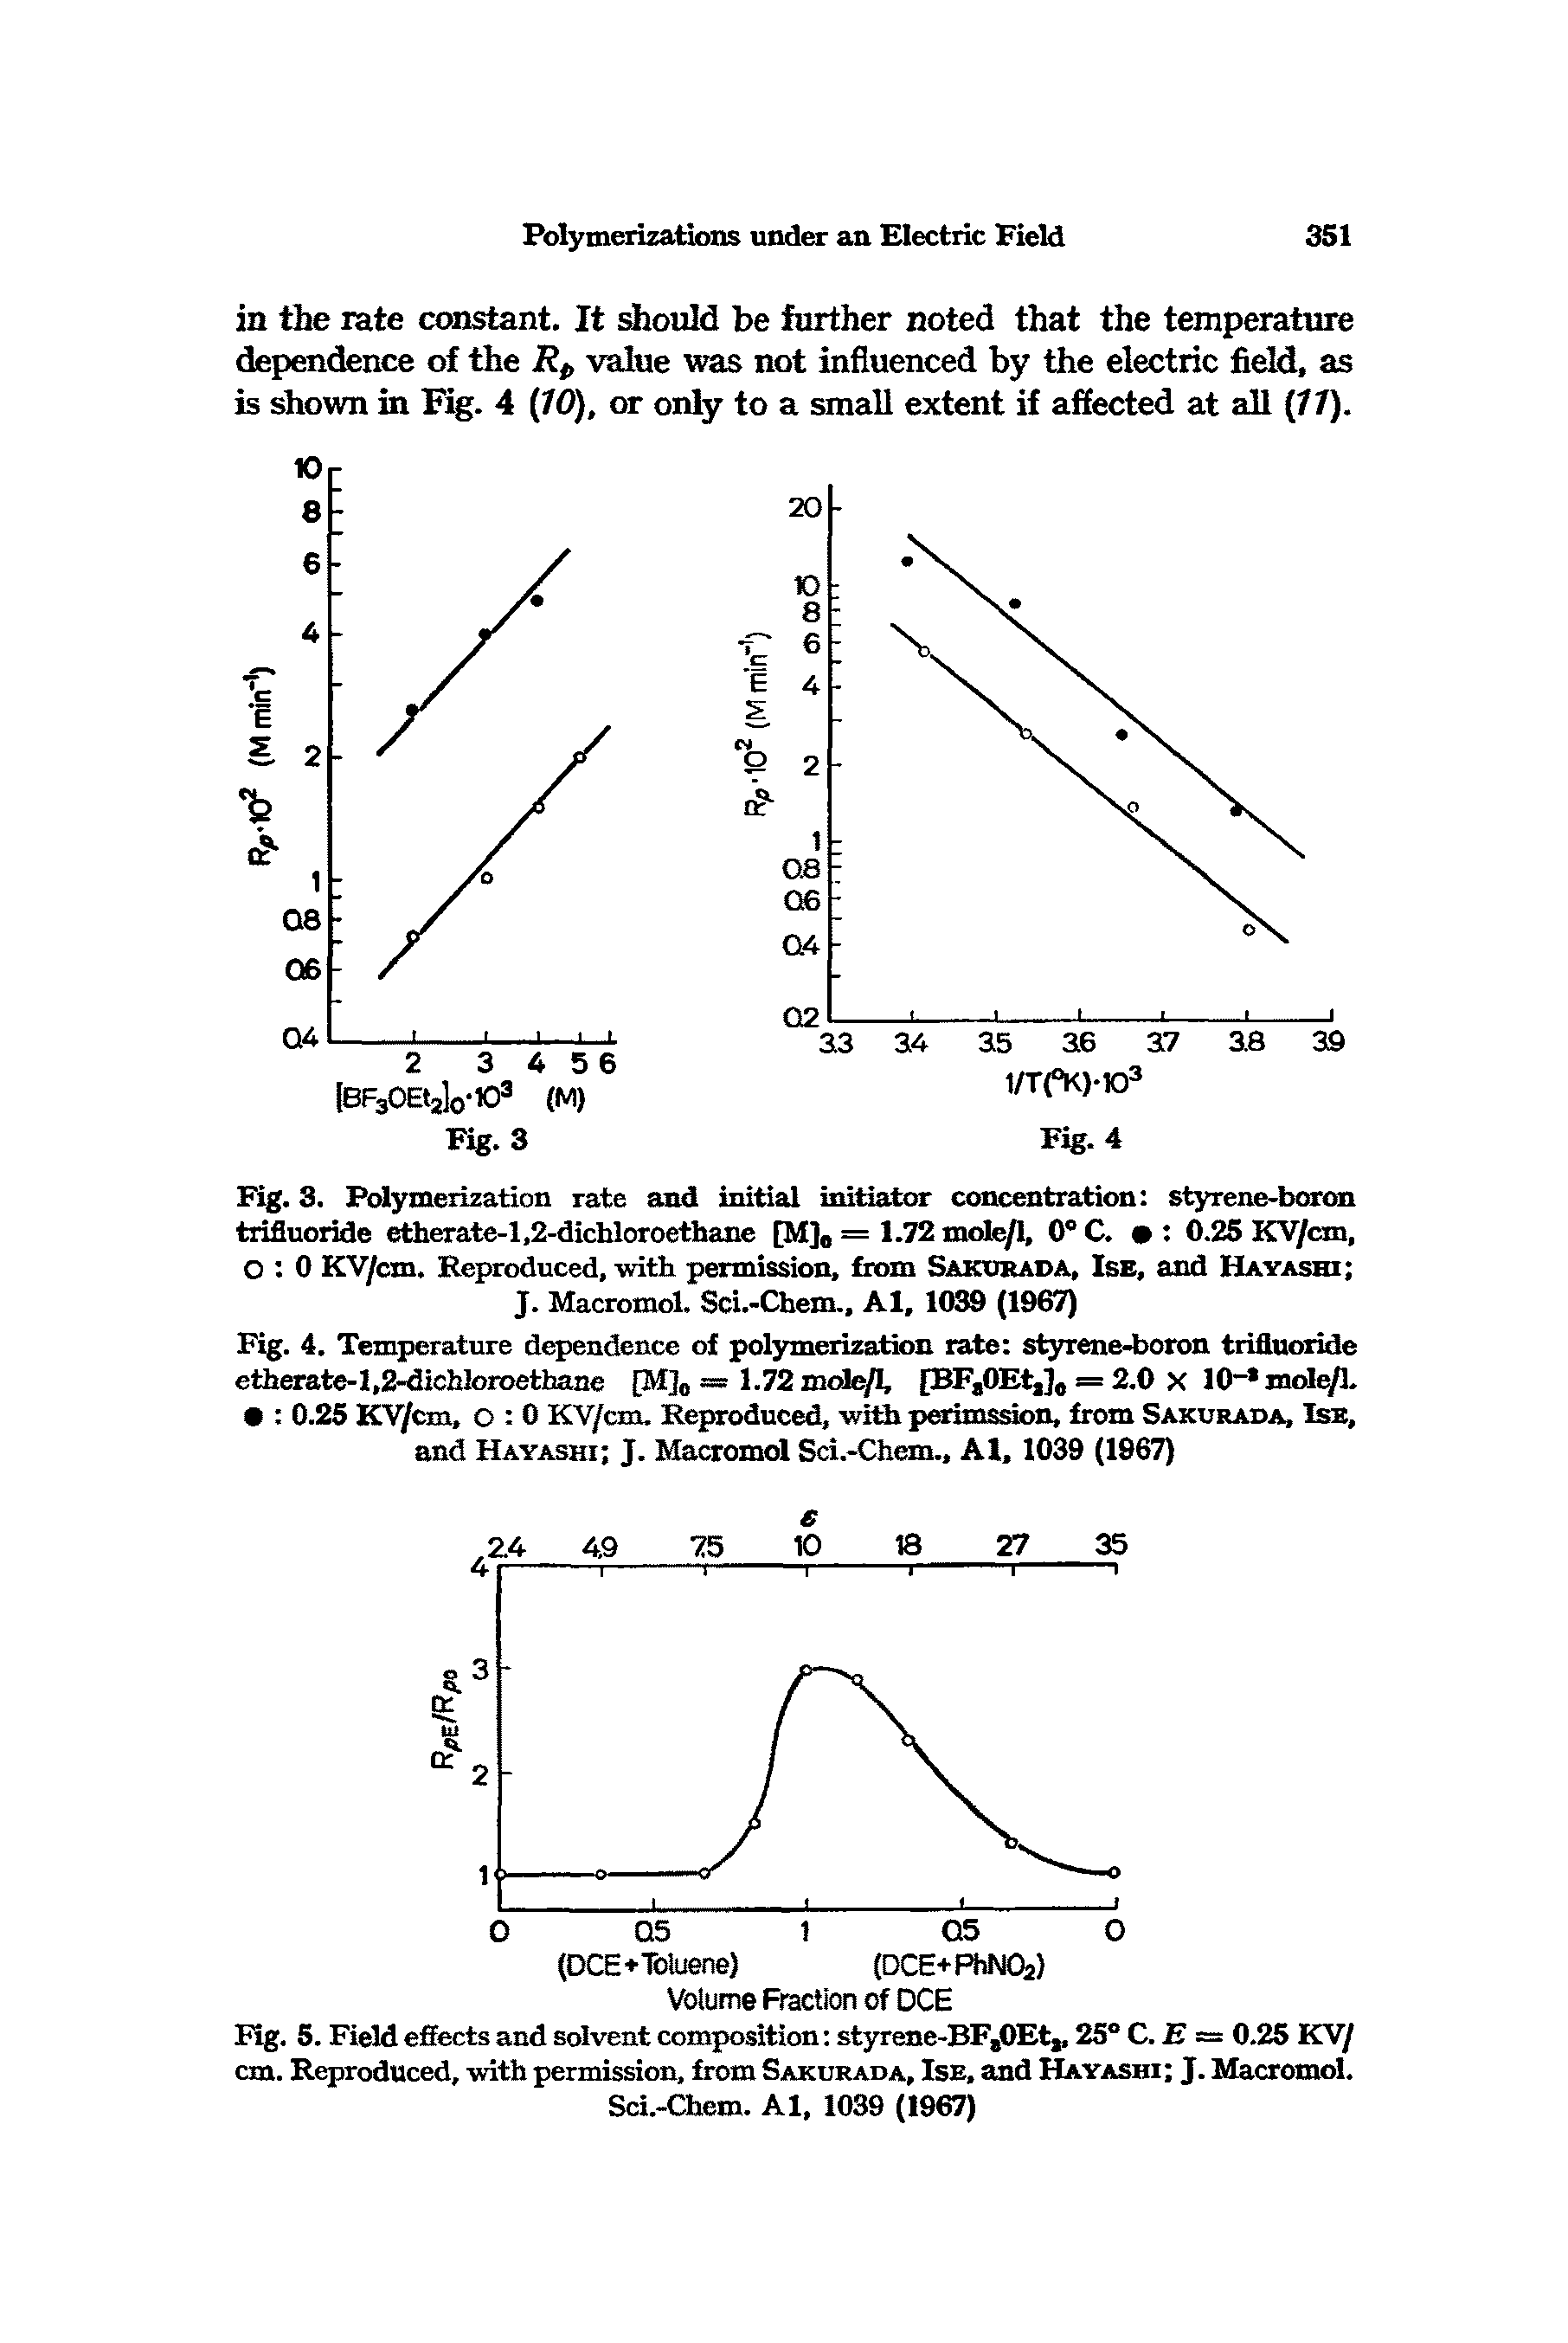 Fig. 3. Polymerization rate and initial initiator concentration styrene-boron trifluoride etherate-l,2-dichloroethane [M]0 = 1.72 mole/1, 0° C. 0.25 KV/cm, O 0 KV/cm. Reproduced, -with permission, from Sakurada, Ise, and Hayashi ...